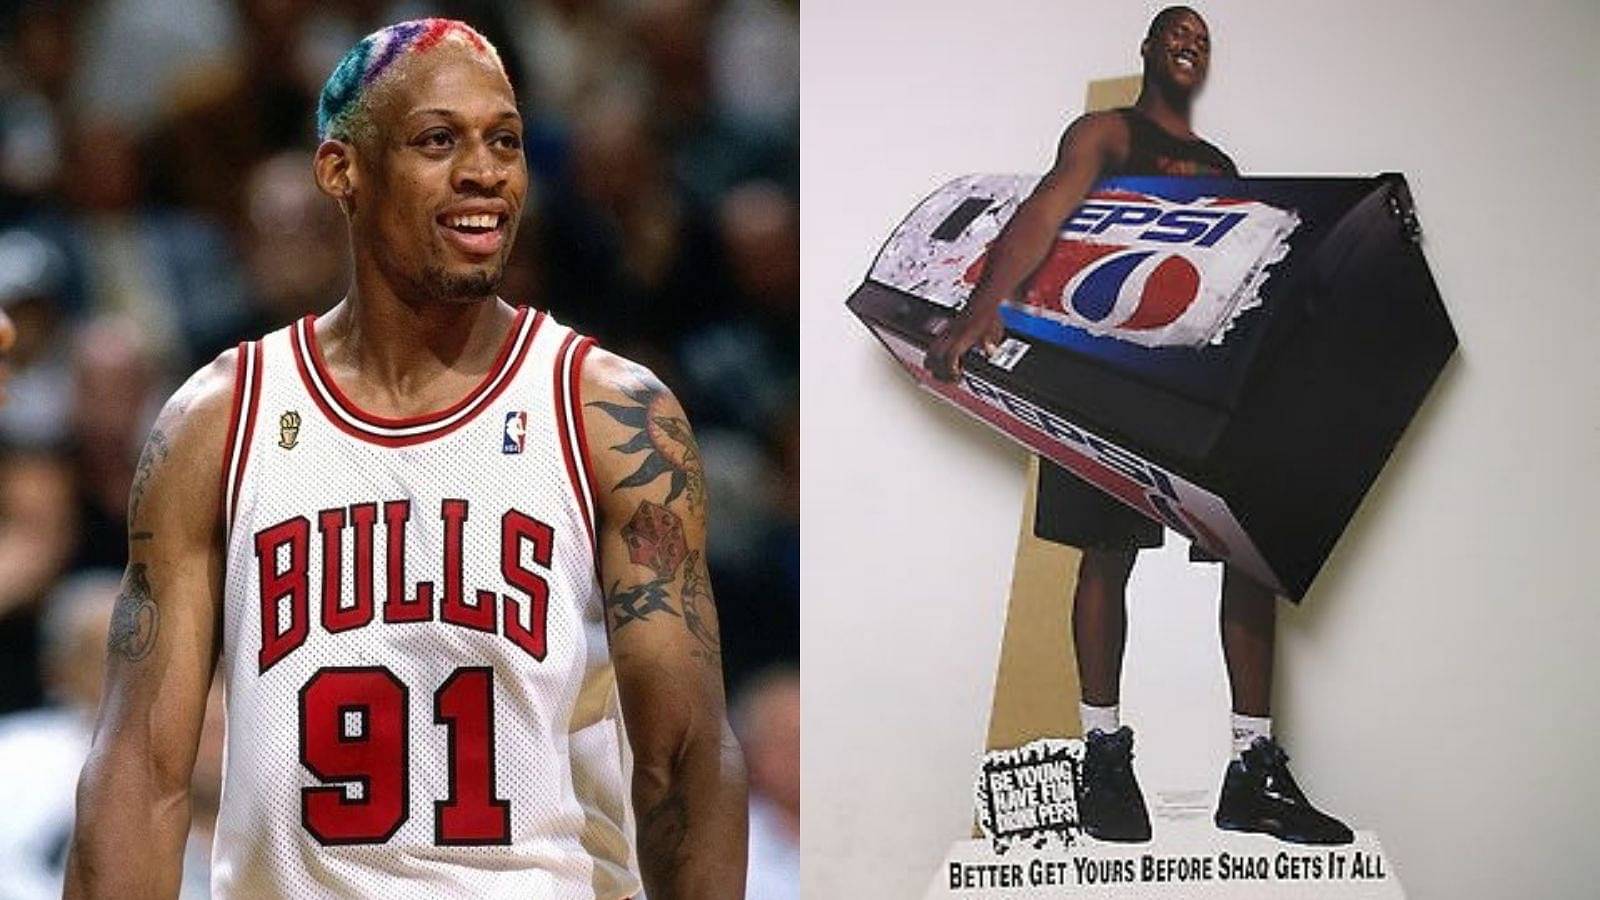 “Shaquille O’Neal not only who*es himself out to a million sponsors but acts like a damn fool”: When Dennis Rodman called out The Diesel for his deals with brands like Pepsi